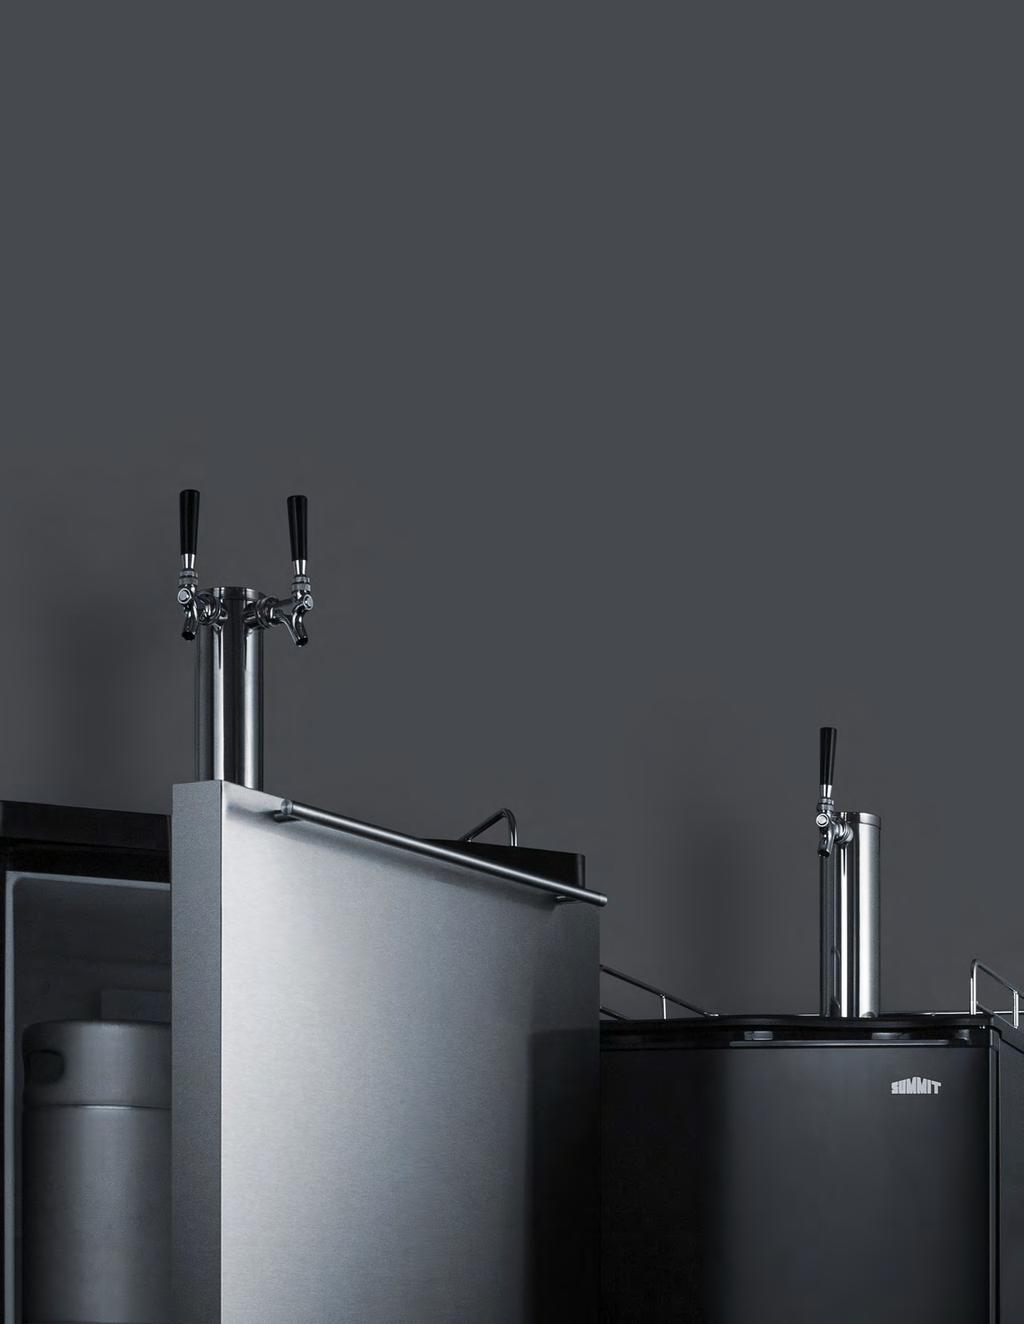 Beer Dispensers & Wine Keg Dispensers COMMERCIAL PRODUCT LINE FEATURES* Store & serve from a full-sized standard keg or two 1/6 barrels Outdoor units available with weatherproof construction Digital